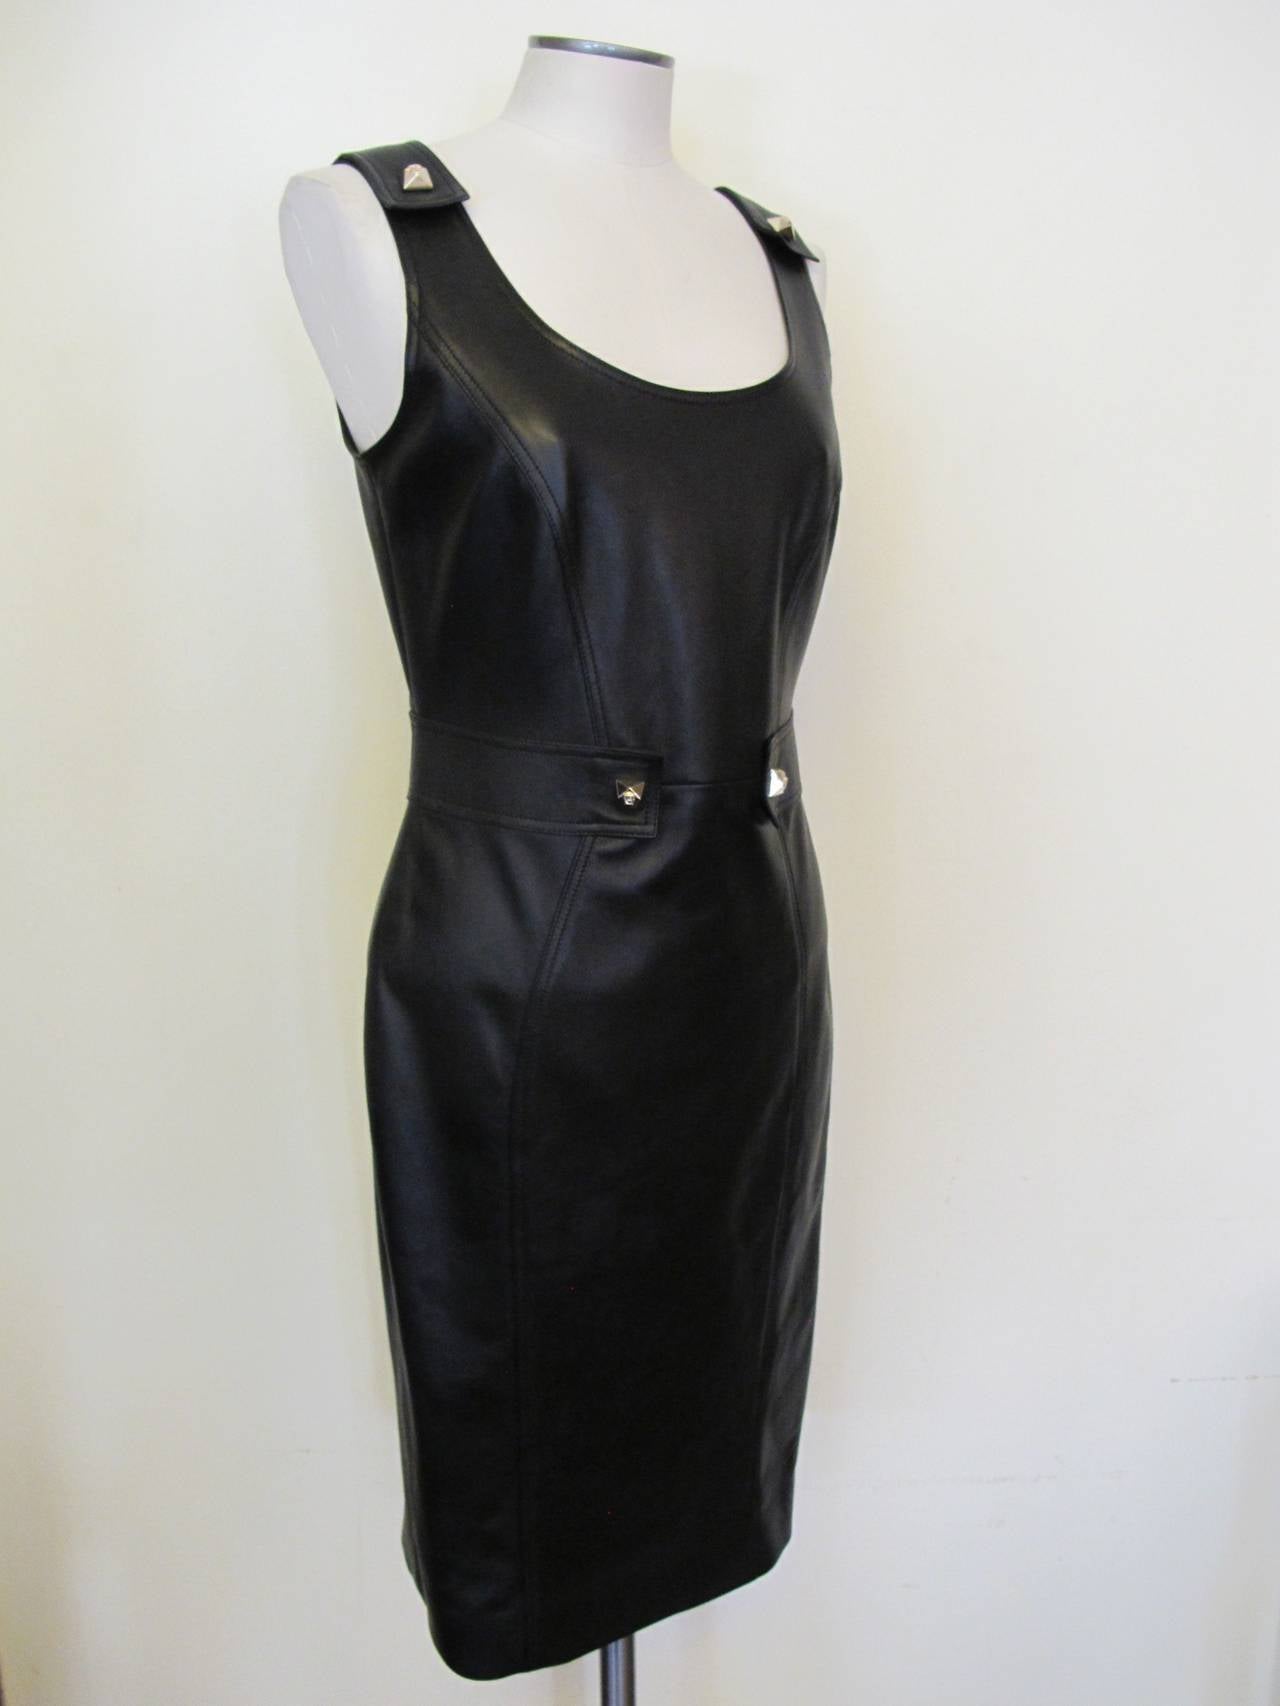 Fabulous navy blue leather sleeveless dress with iconic Versace lining.
There are 4 medusa head buttons - 2 on shoulder and 2 on waist band.
Shoulder to shoulder measures 14 inches.

Original price was $2,975.00
Helpers price is $1,550.00